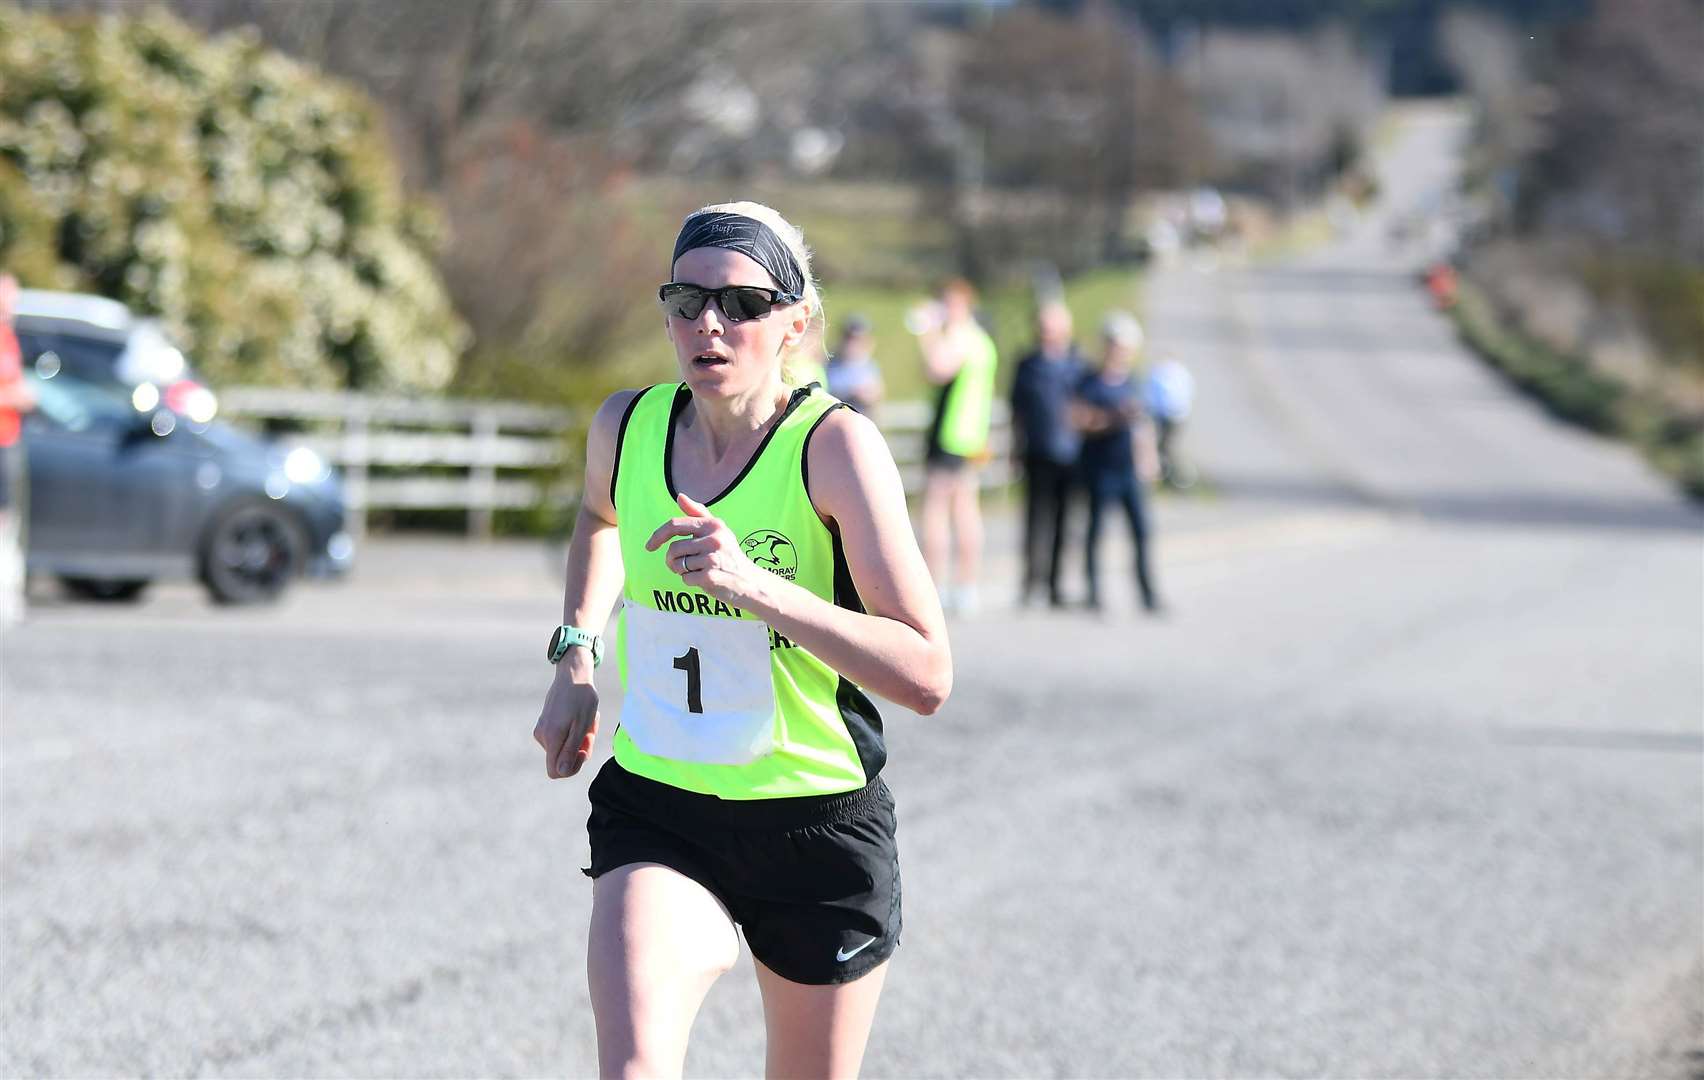 Michelle Donaldson-Slater won the women's race at her home club's 10k. Picture: Becky Saunderson..